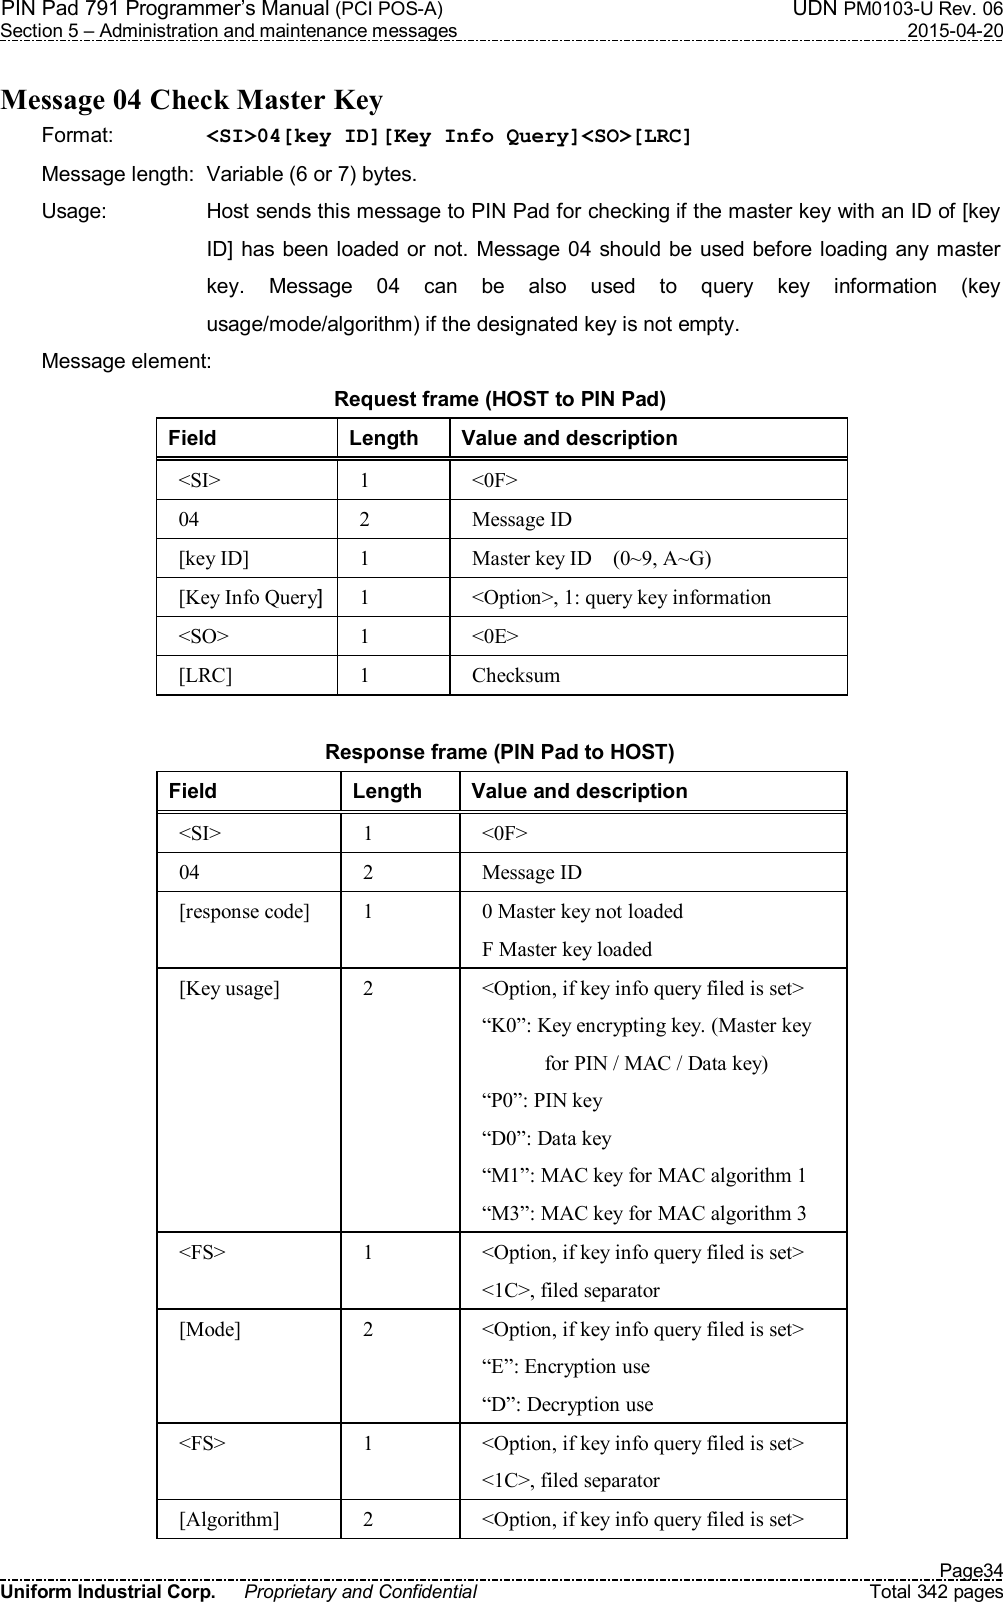 PIN Pad 791 Programmer’s Manual (PCI POS-A)  UDN PM0103-U Rev. 06 Section 5 – Administration and maintenance messages  2015-04-20   Page34 Uniform Industrial Corp.  Proprietary and Confidential  Total 342 pages  Message 04 Check Master Key Format:    &lt;SI&gt;04[key ID][Key Info Query]&lt;SO&gt;[LRC] Message length:  Variable (6 or 7) bytes. Usage:  Host sends this message to PIN Pad for checking if the master key with an ID of [key ID] has been loaded or not. Message 04 should be used before loading any master key.  Message  04  can  be  also  used  to  query  key  information  (key usage/mode/algorithm) if the designated key is not empty. Message element: Request frame (HOST to PIN Pad) Field  Length  Value and description &lt;SI&gt;  1  &lt;0F&gt; 04  2  Message ID [key ID]  1  Master key ID    (0~9, A~G) [Key Info Query] 1  &lt;Option&gt;, 1: query key information &lt;SO&gt;  1  &lt;0E&gt; [LRC]  1  Checksum    Response frame (PIN Pad to HOST) Field  Length  Value and description &lt;SI&gt;  1  &lt;0F&gt; 04  2  Message ID [response code]  1  0 Master key not loaded F Master key loaded [Key usage]  2  &lt;Option, if key info query filed is set&gt; “K0”: Key encrypting key. (Master key   for PIN / MAC / Data key) “P0”: PIN key “D0”: Data key “M1”: MAC key for MAC algorithm 1 “M3”: MAC key for MAC algorithm 3 &lt;FS&gt;  1  &lt;Option, if key info query filed is set&gt; &lt;1C&gt;, filed separator [Mode]  2  &lt;Option, if key info query filed is set&gt; “E”: Encryption use “D”: Decryption use &lt;FS&gt;  1  &lt;Option, if key info query filed is set&gt; &lt;1C&gt;, filed separator [Algorithm]  2  &lt;Option, if key info query filed is set&gt; 